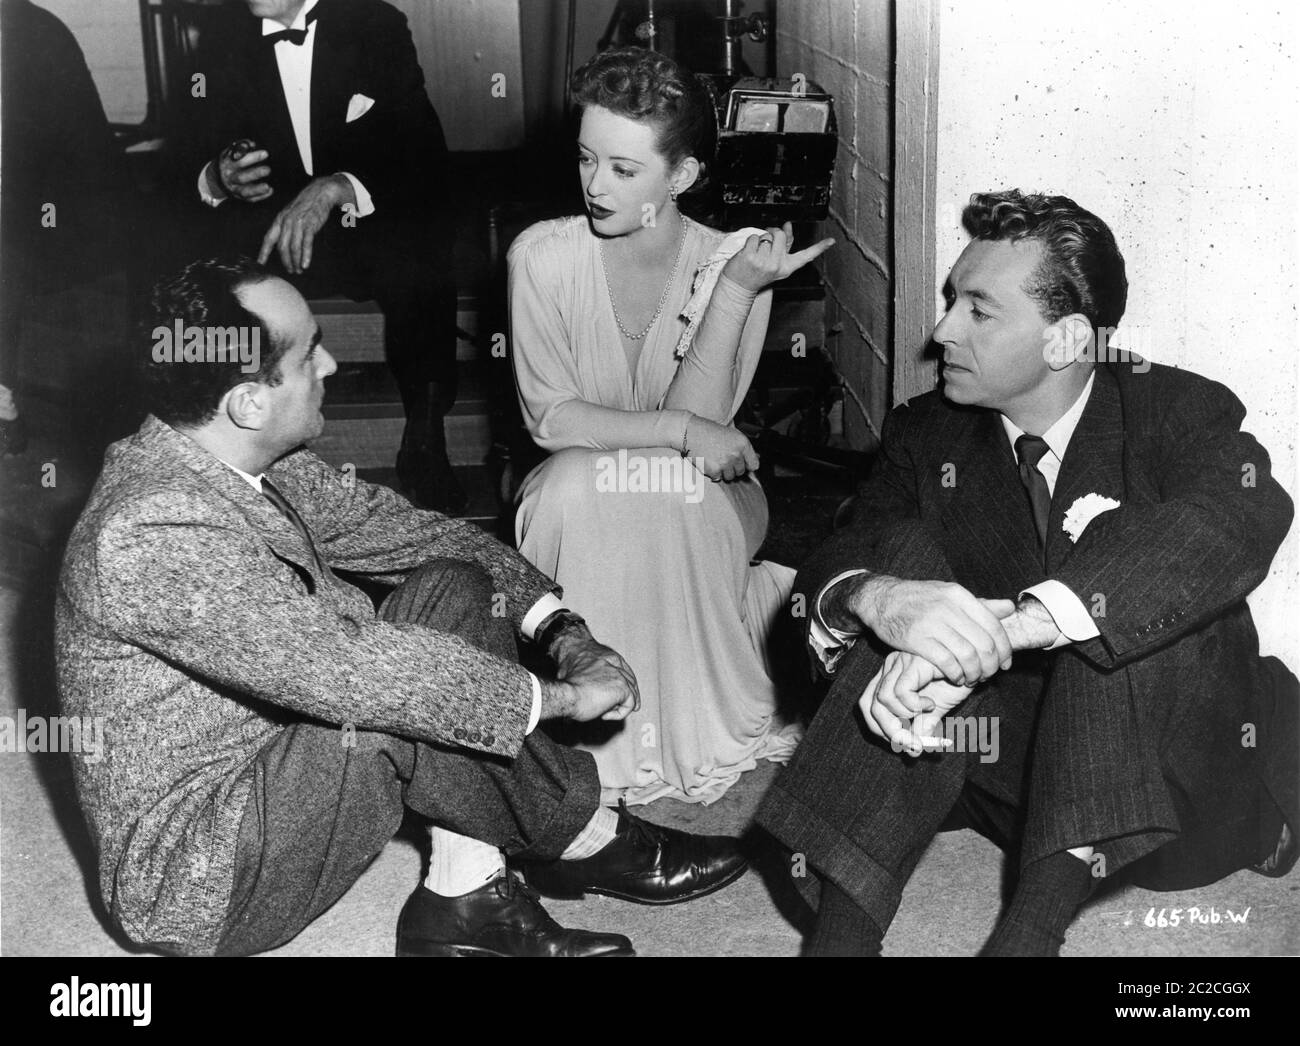 Director IRVING RAPPER BETTE DAVIS and PAUL HENRIED on set candid during filming of DECEPTION 1946 music Erich Wolfgang Korngold Warner Bros. Stock Photo